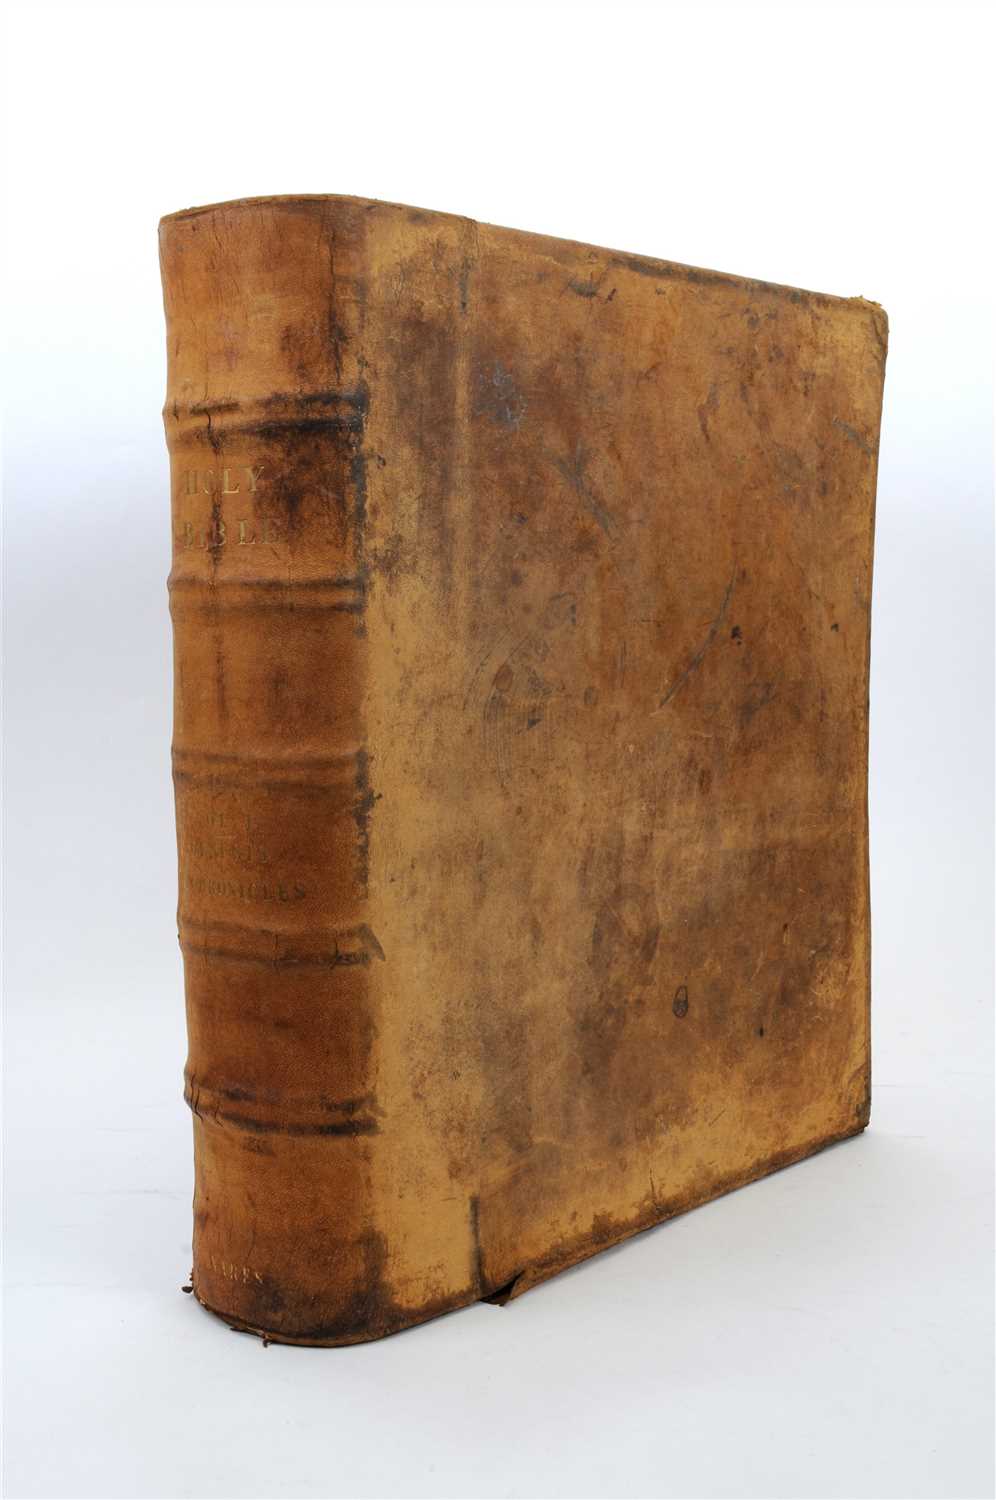 Lot 551 - The Holy Bible, a large scale edition dated 1824